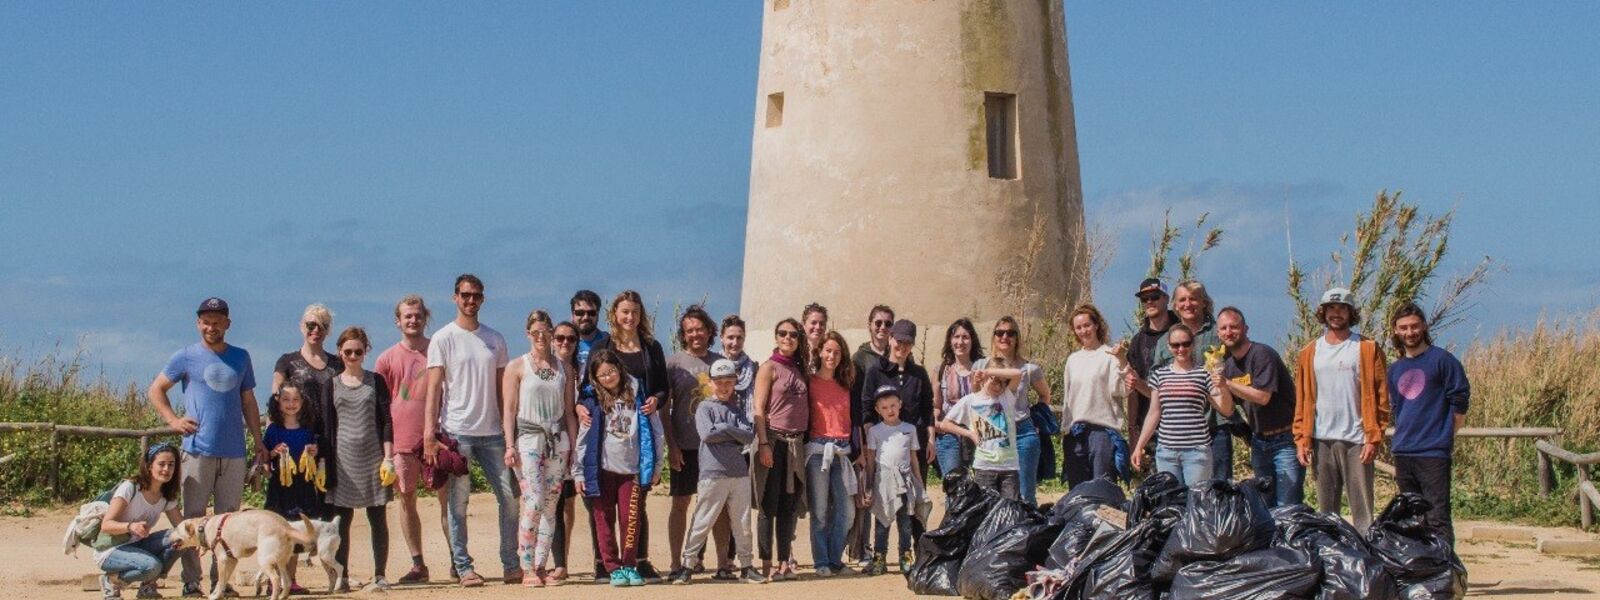 Beach cleanup in El Palmar for more sustainability in surfing